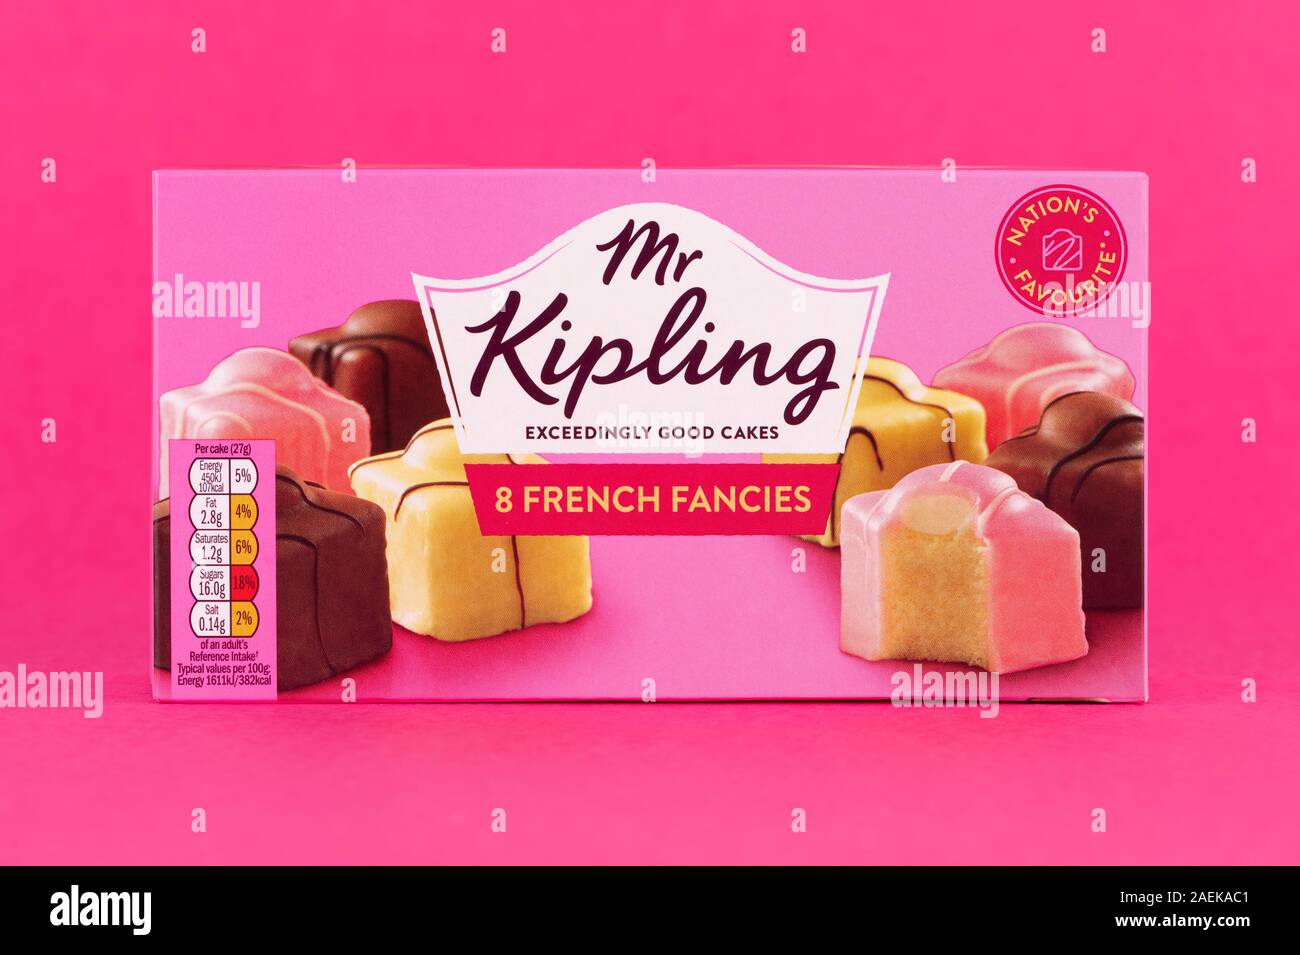 A box of Mr Kipling French Fancies shot on a pink background. Stock Photo